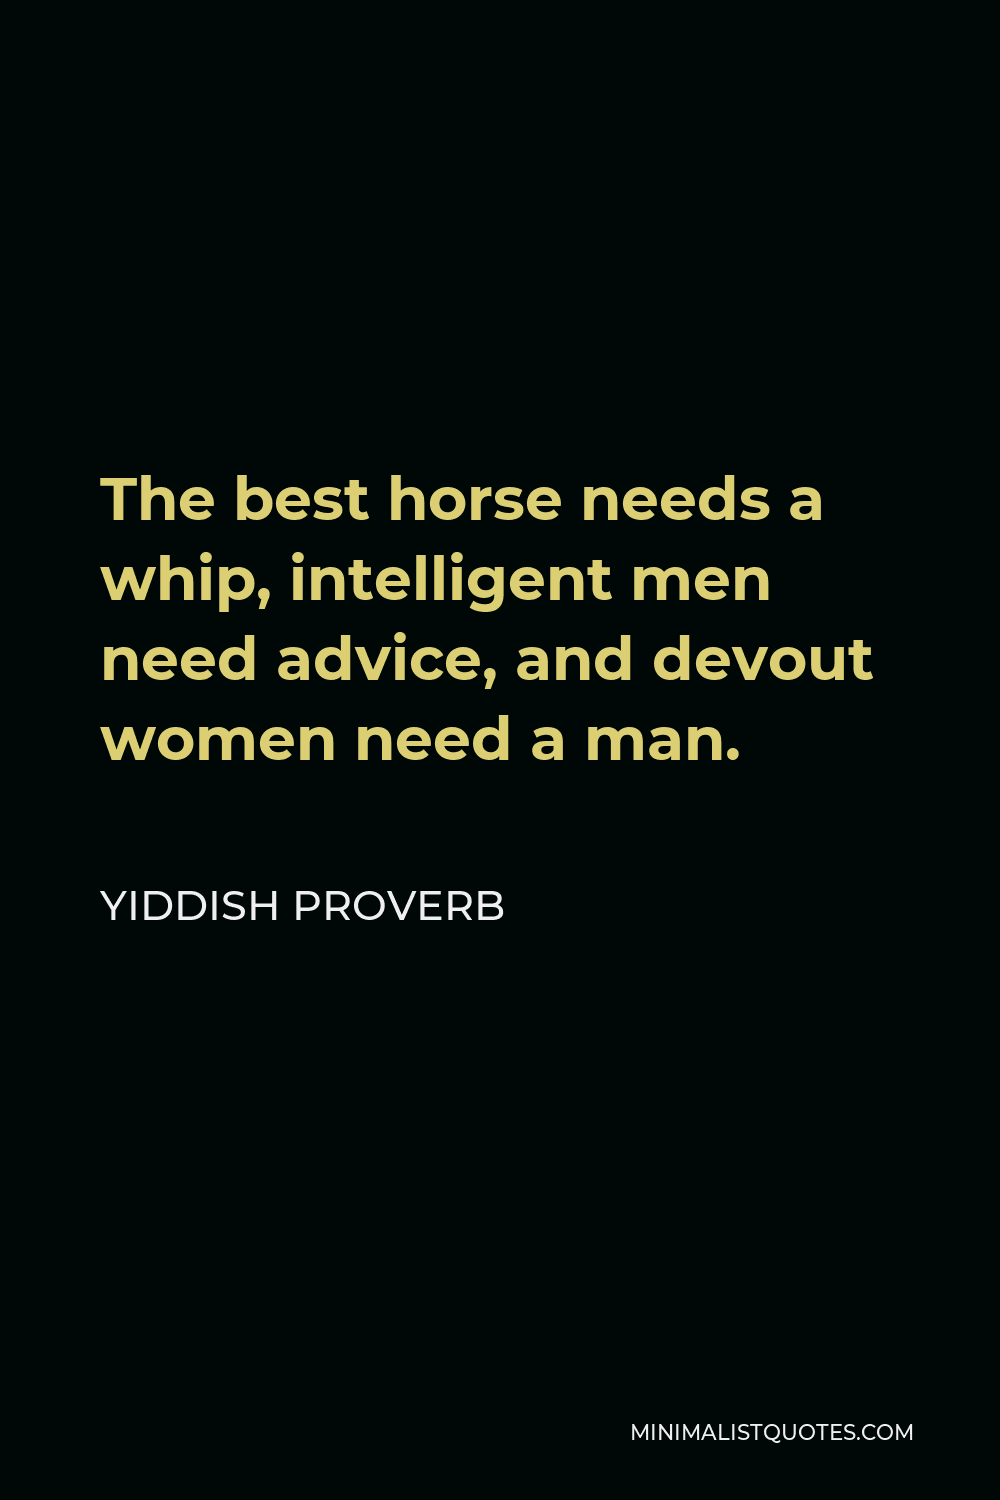 Yiddish Proverb Quote - The best horse needs a whip, intelligent men need advice, and devout women need a man.